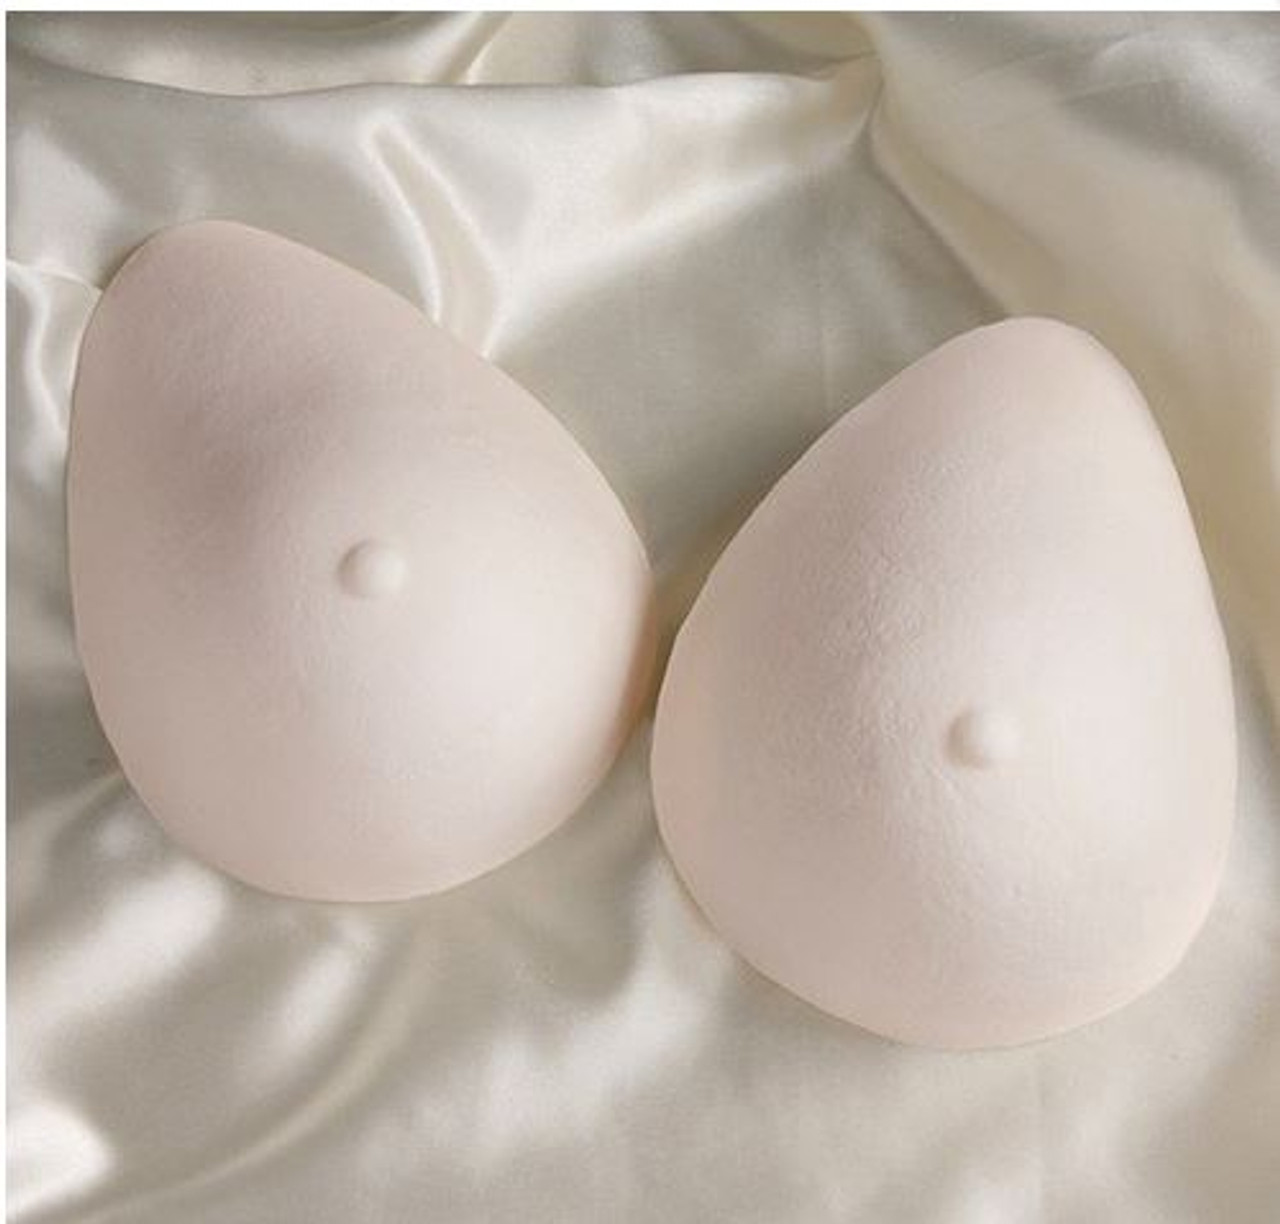 Weighted Flat-back Foam Breast Form